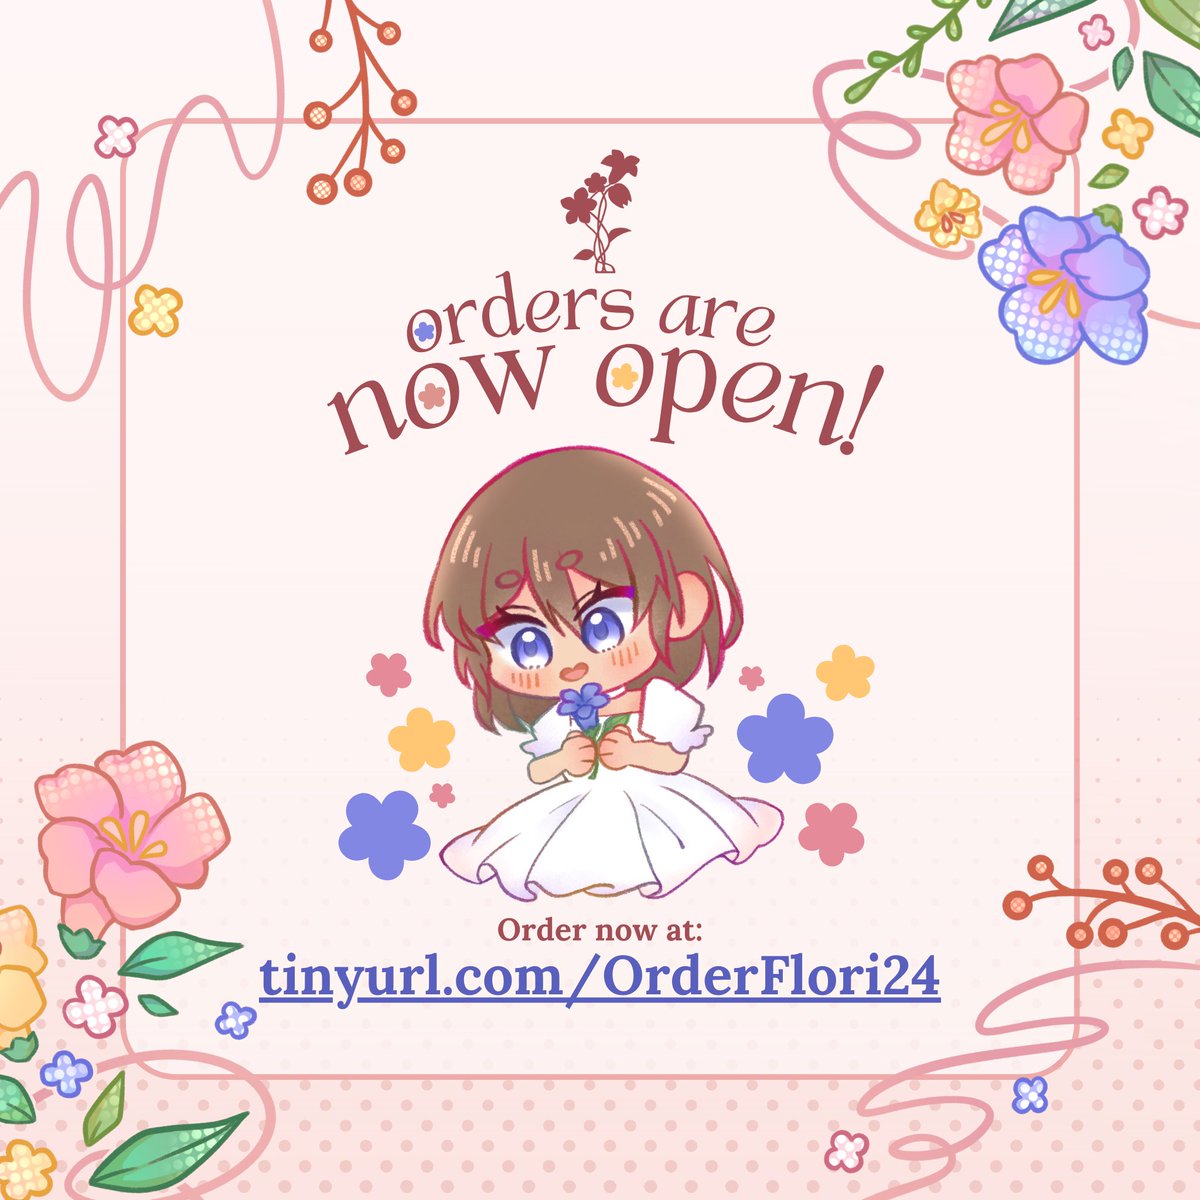 ...Do you see the meadows rolling with new blooms? 💐😳💭

Florilegium 2024 Orders are now OPEN 🌷✨ Purchase a copy of our Zine NOW using this link:
tinyurl.com/OrderFlori24

Orders will close on May 21, 2024, so make sure to grab a copy by then~✨